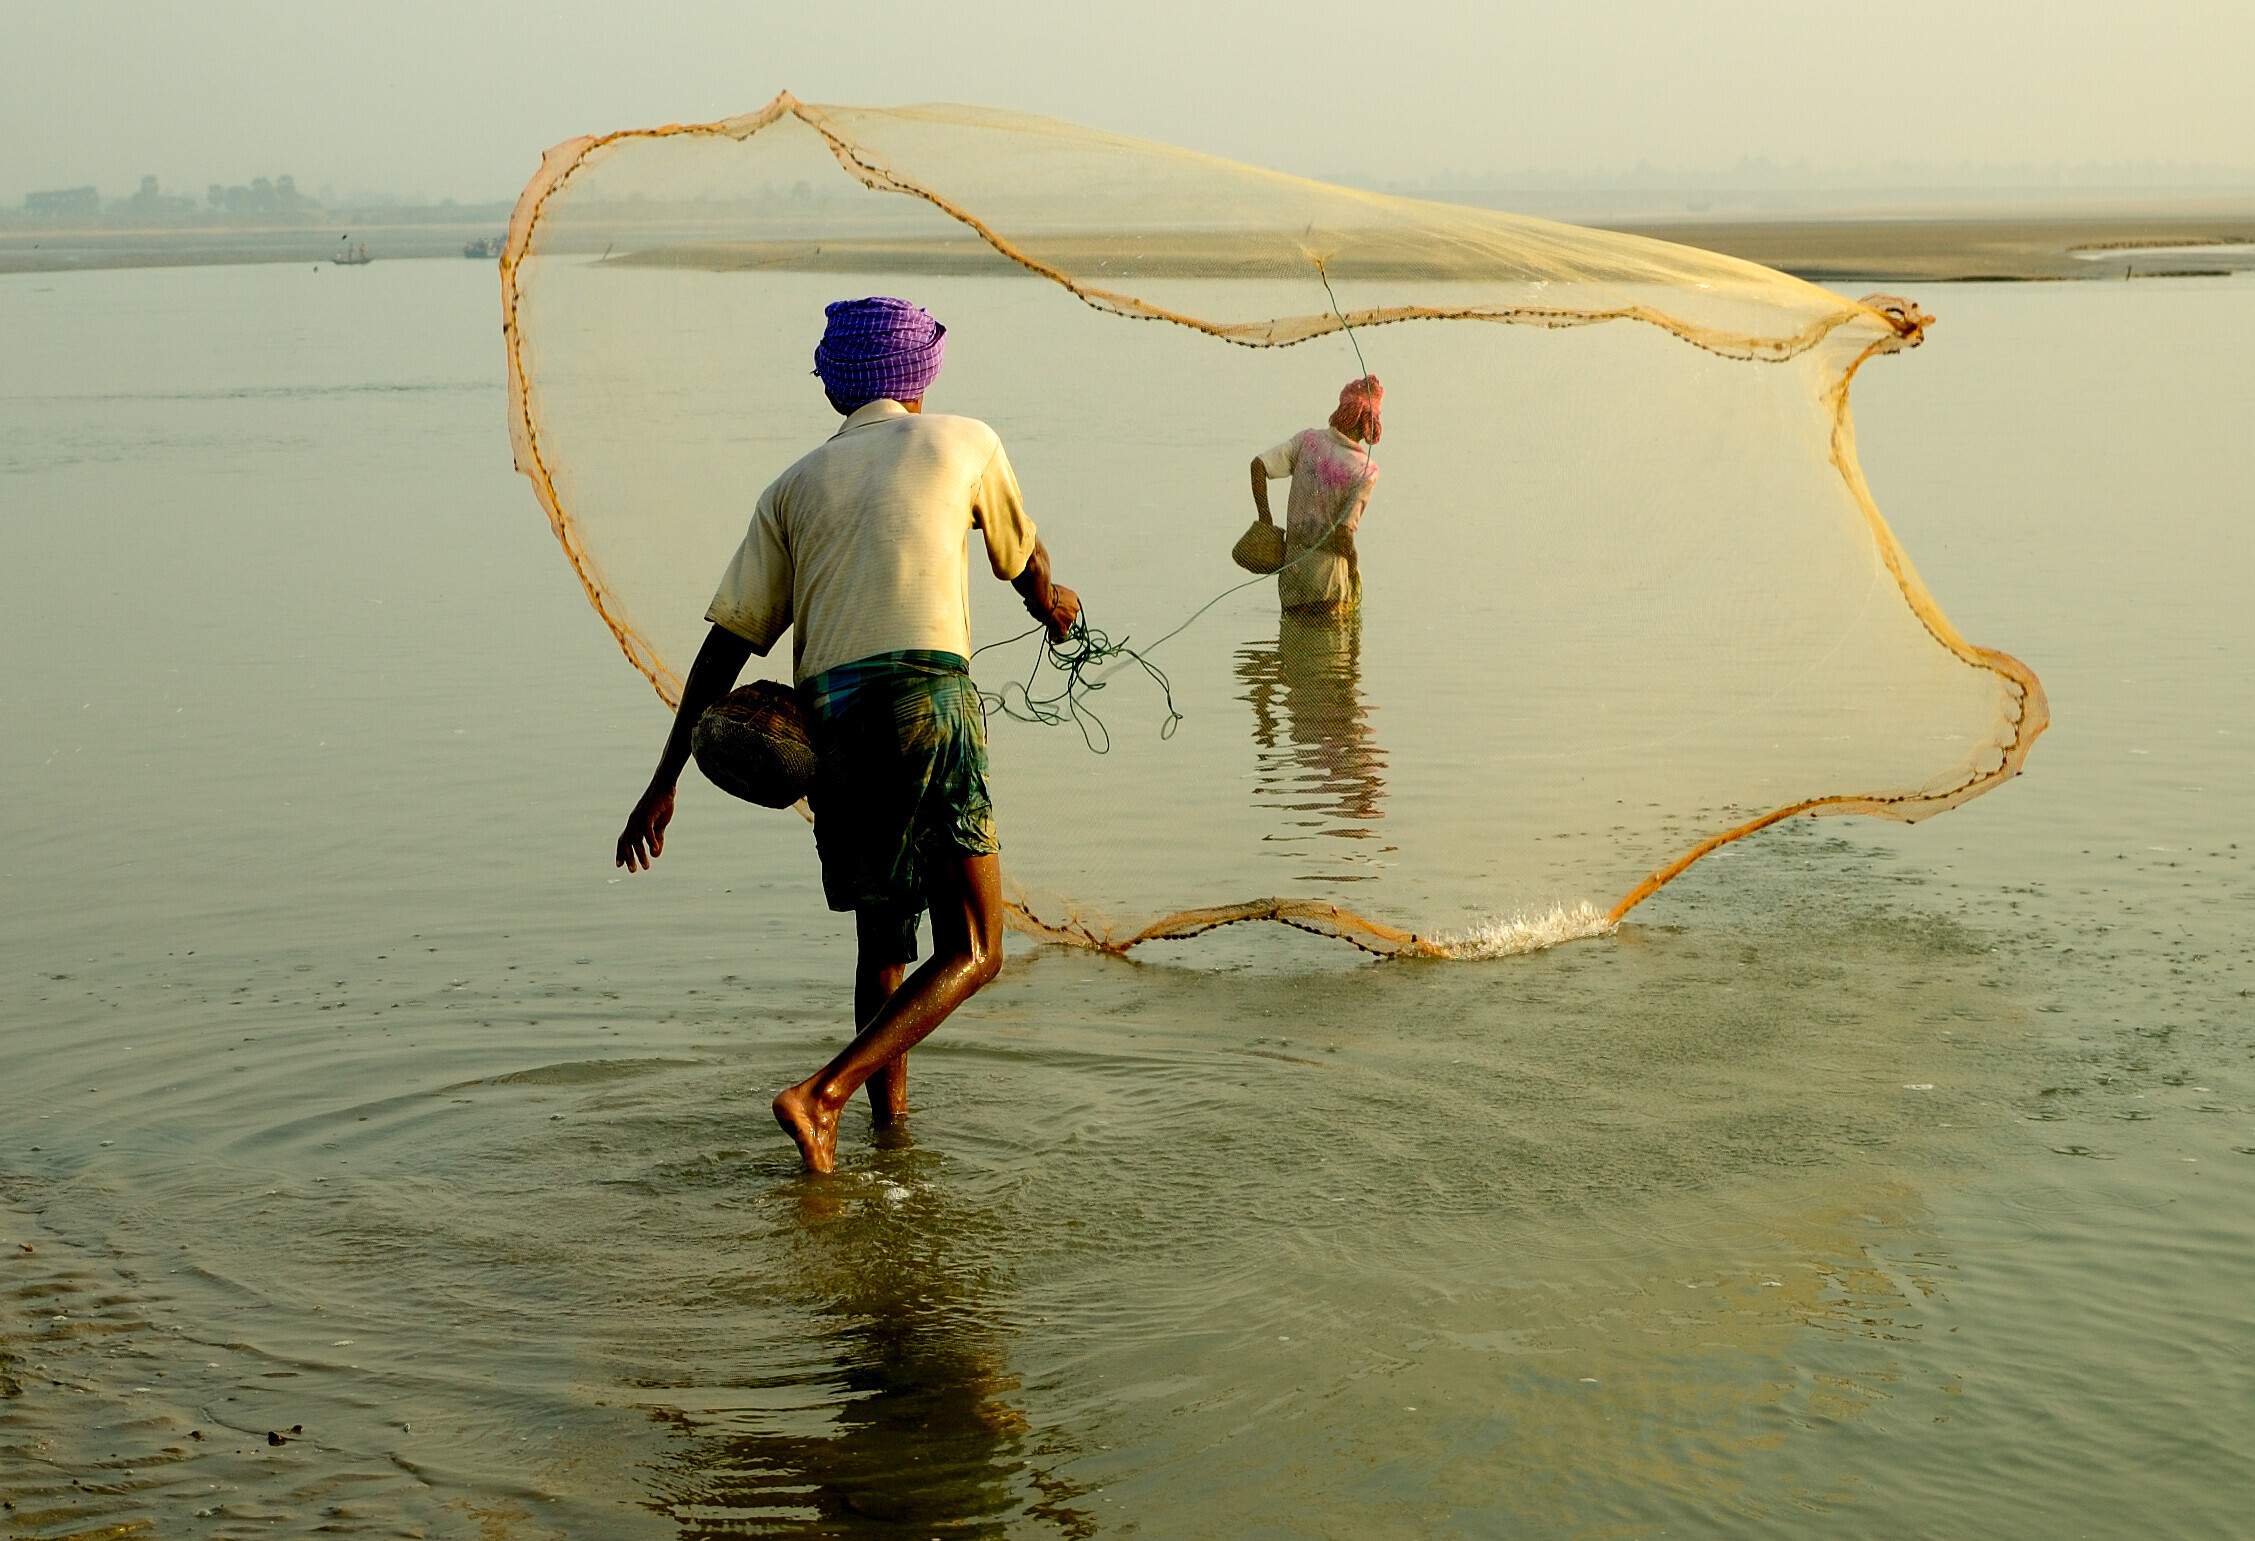 Two people casting a fishing net in the shallows.